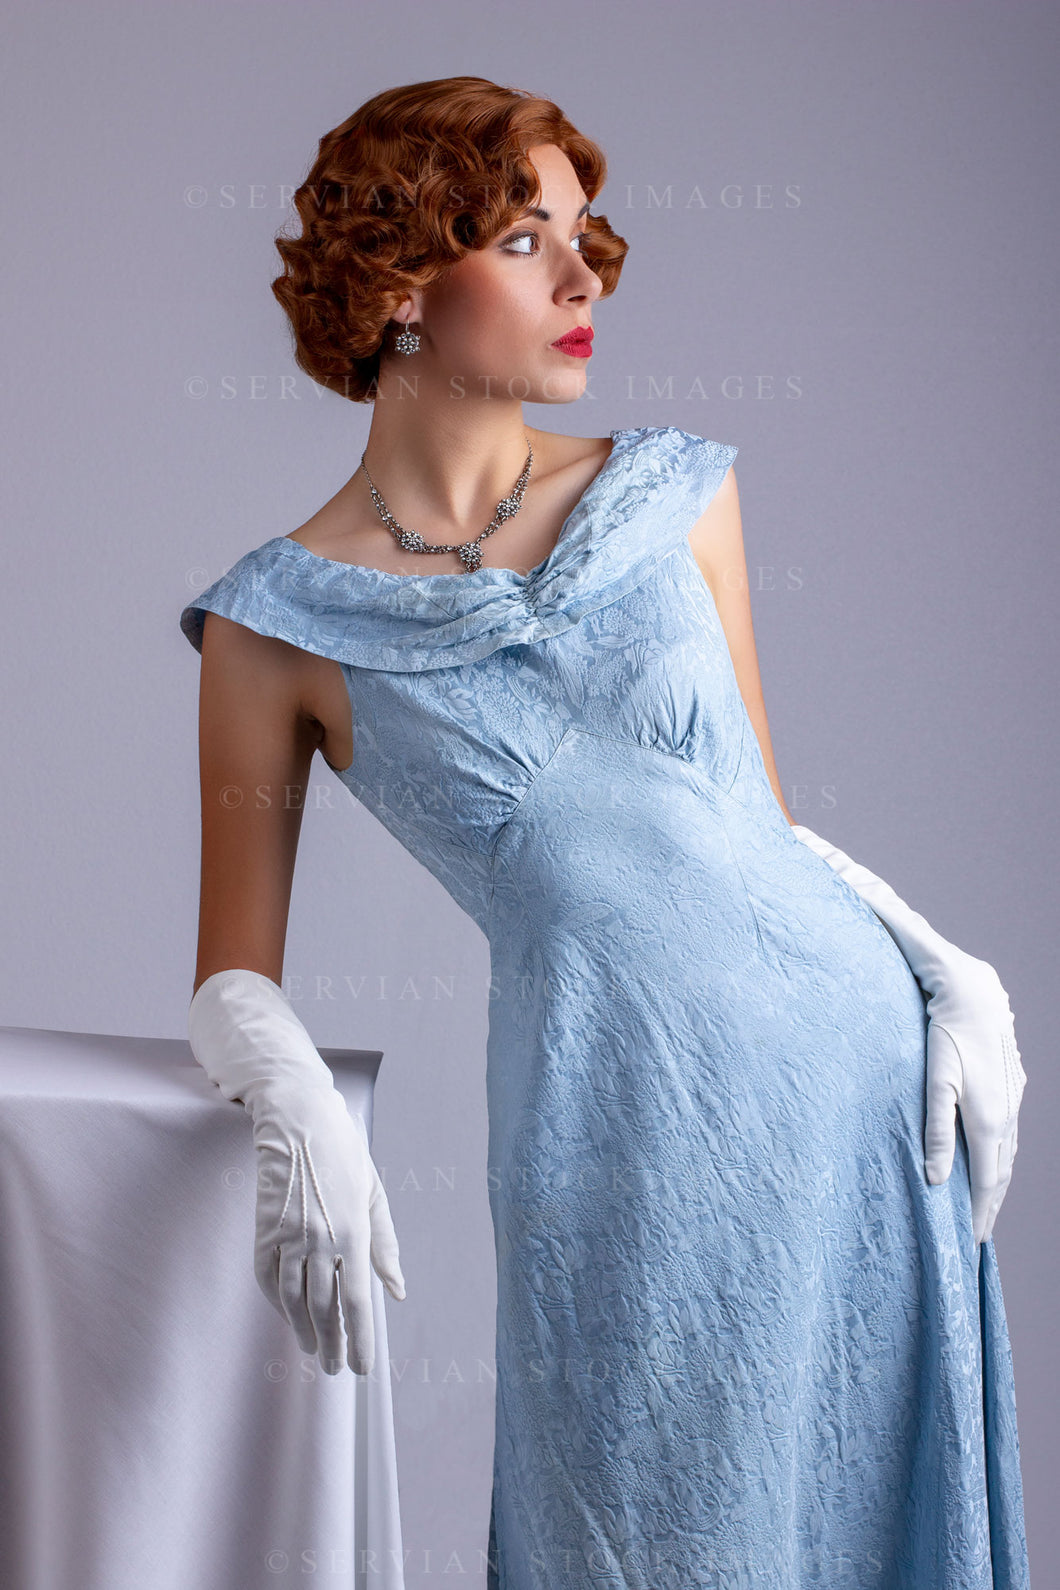 1930s woman wearing a blue vintage dress and a leaning on a plinth (Sarah 0207)